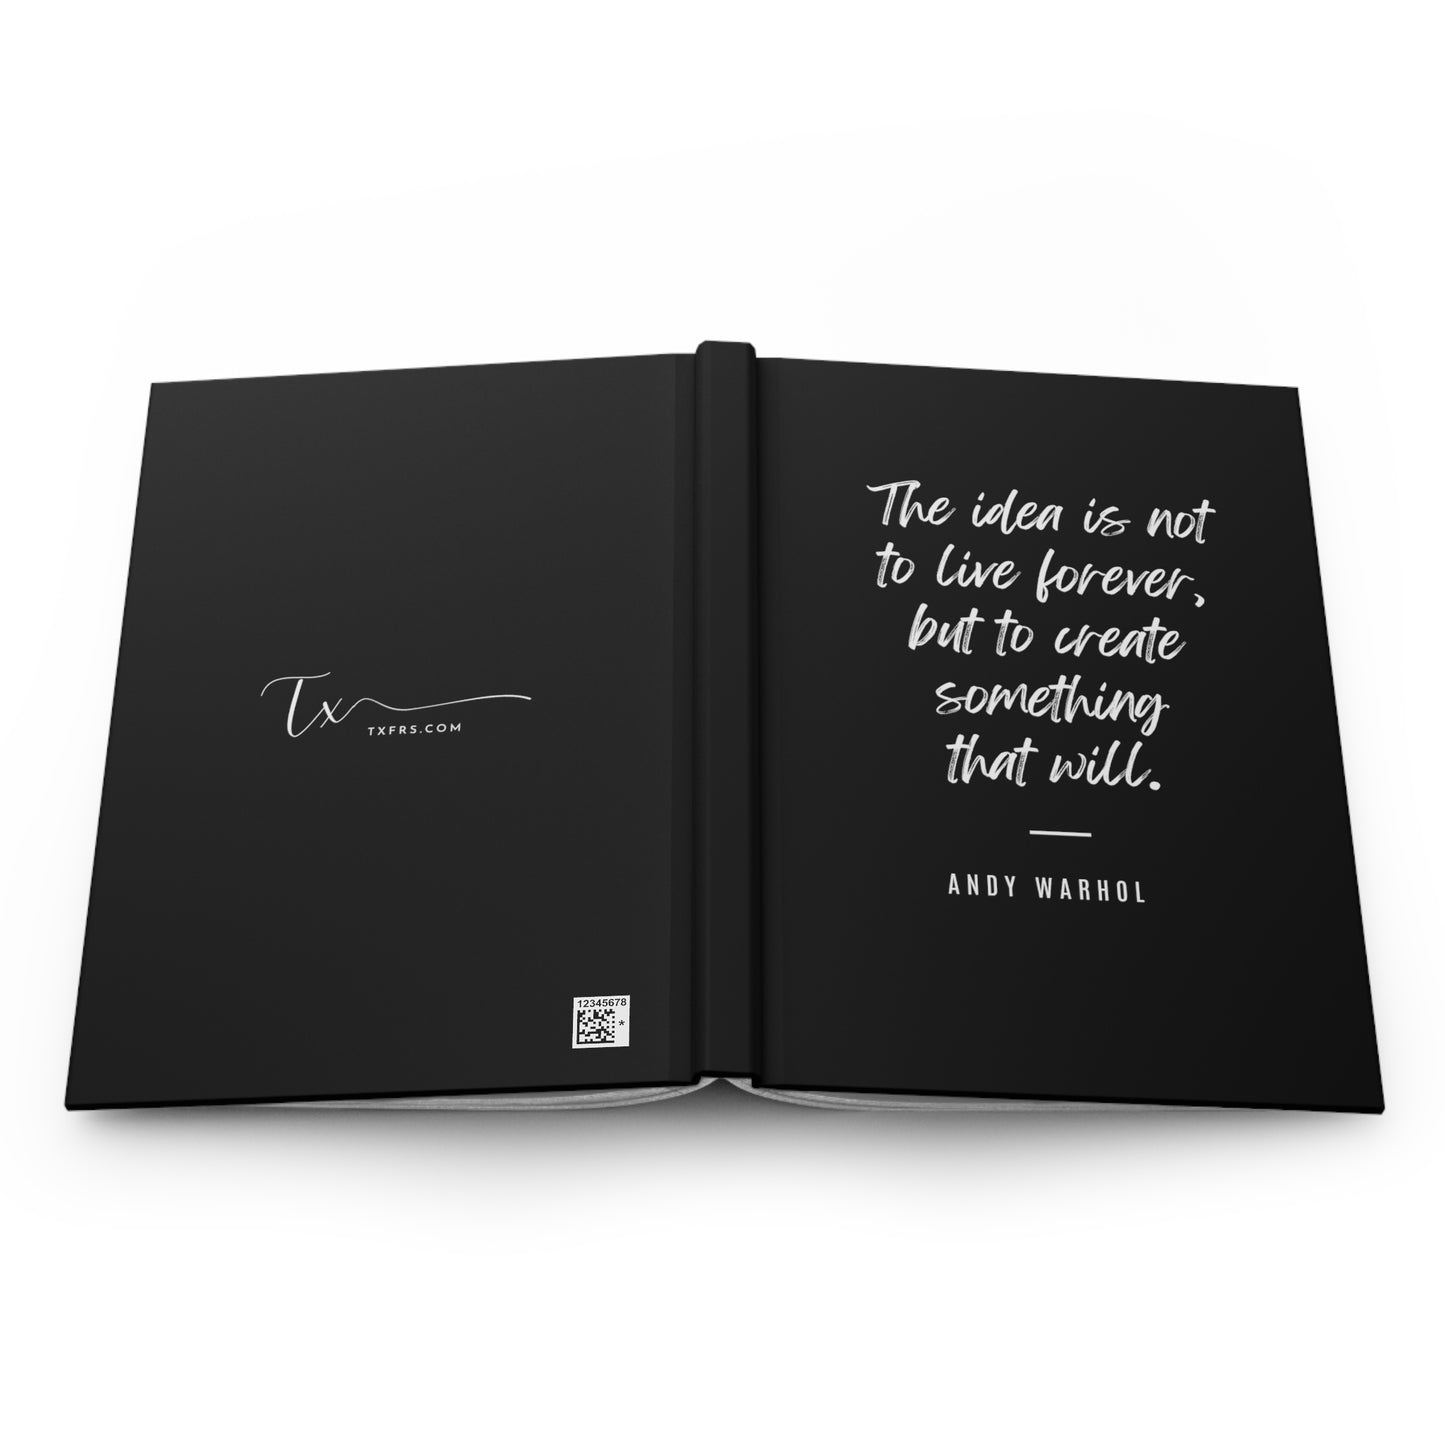 Black Hardcover Journal Matte - Motivational Quote:  The idea is not to live forever, but to create something that will. - Andy Warhol